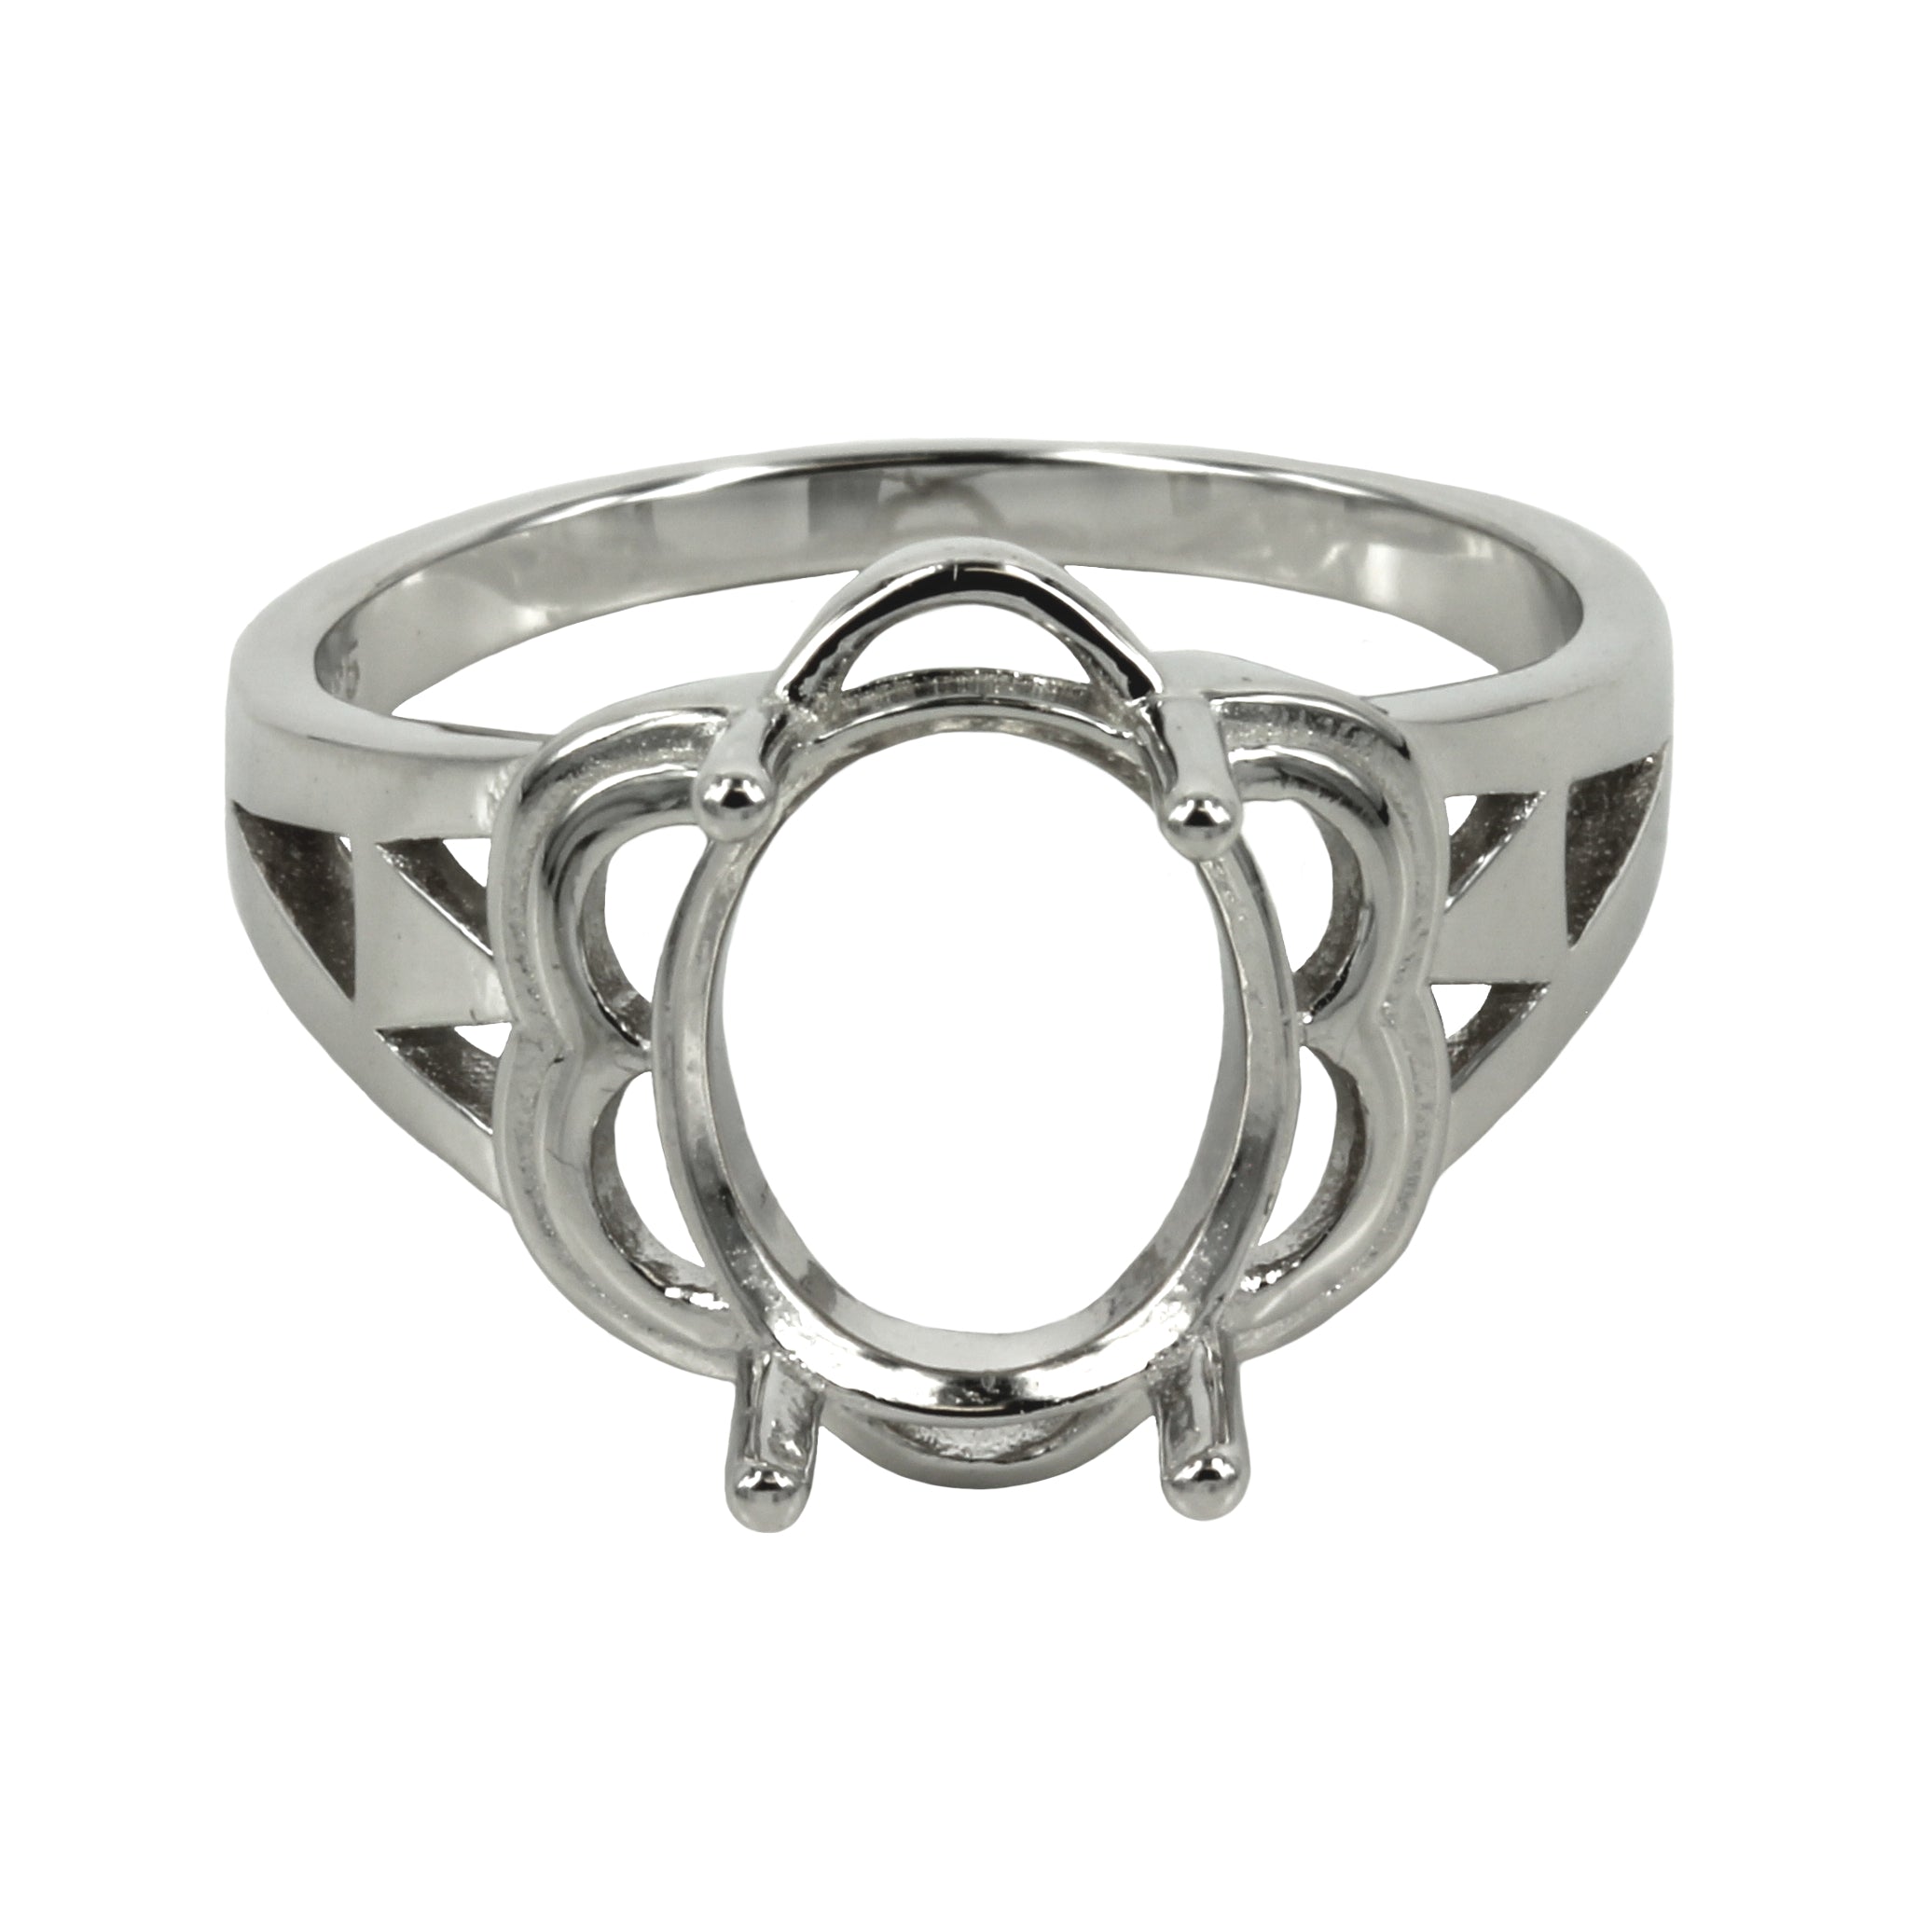 Unique Motif Ring with Oval Prongs Mounting in Sterling Silver - Various Sizes